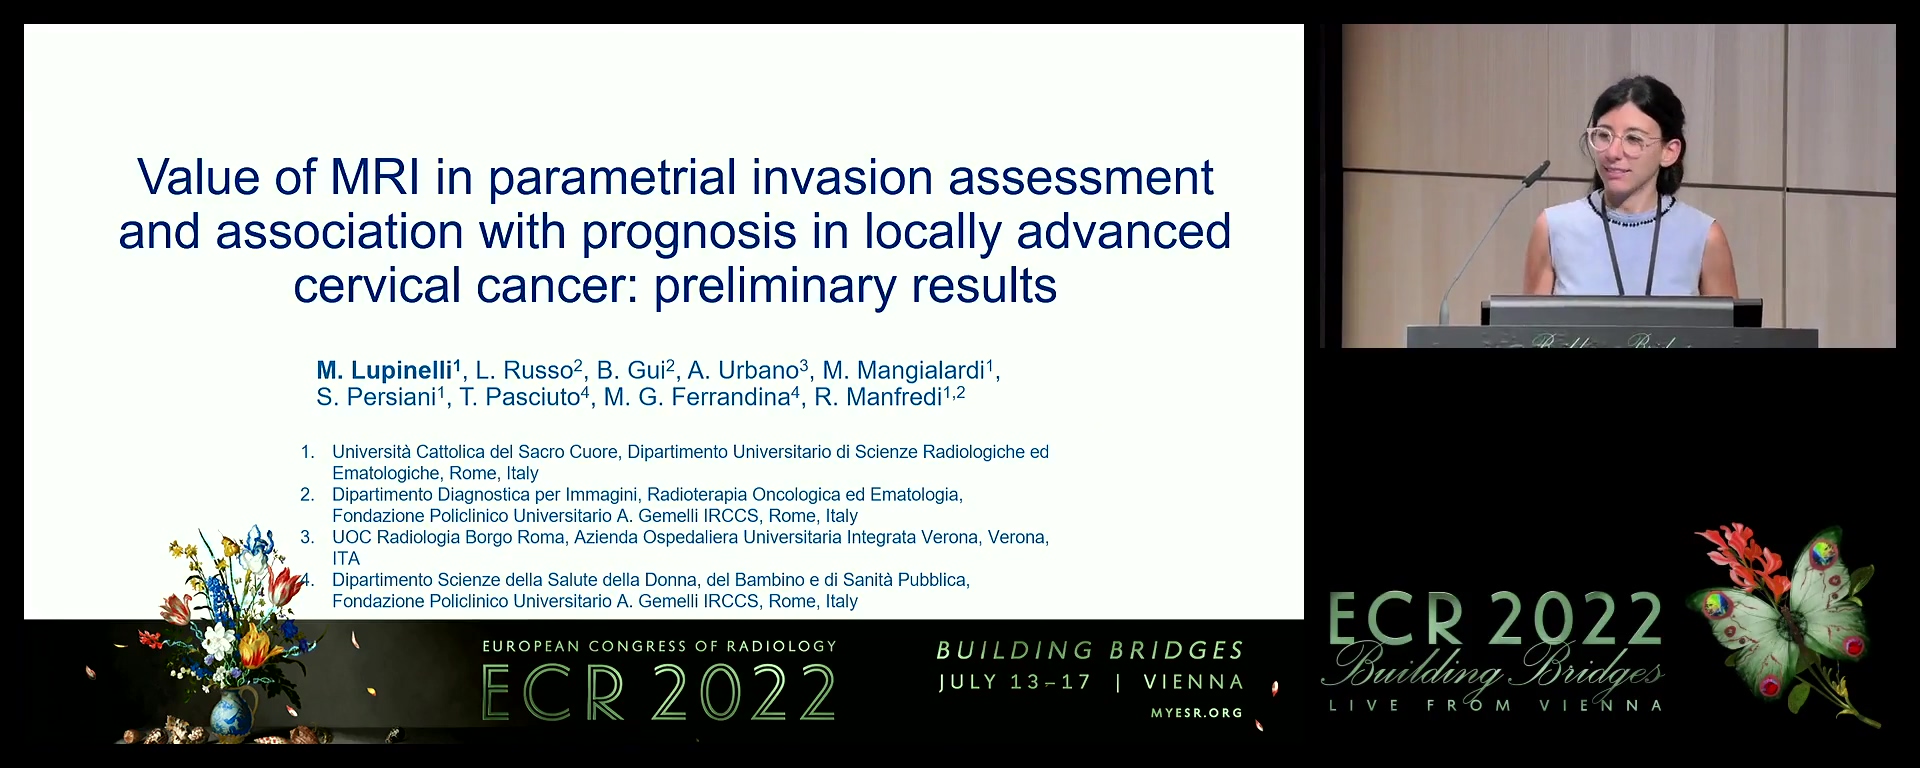 Value of MRI in parametrial invasion assessment and association with prognosis in locally advanced cervical cancer: preliminary results